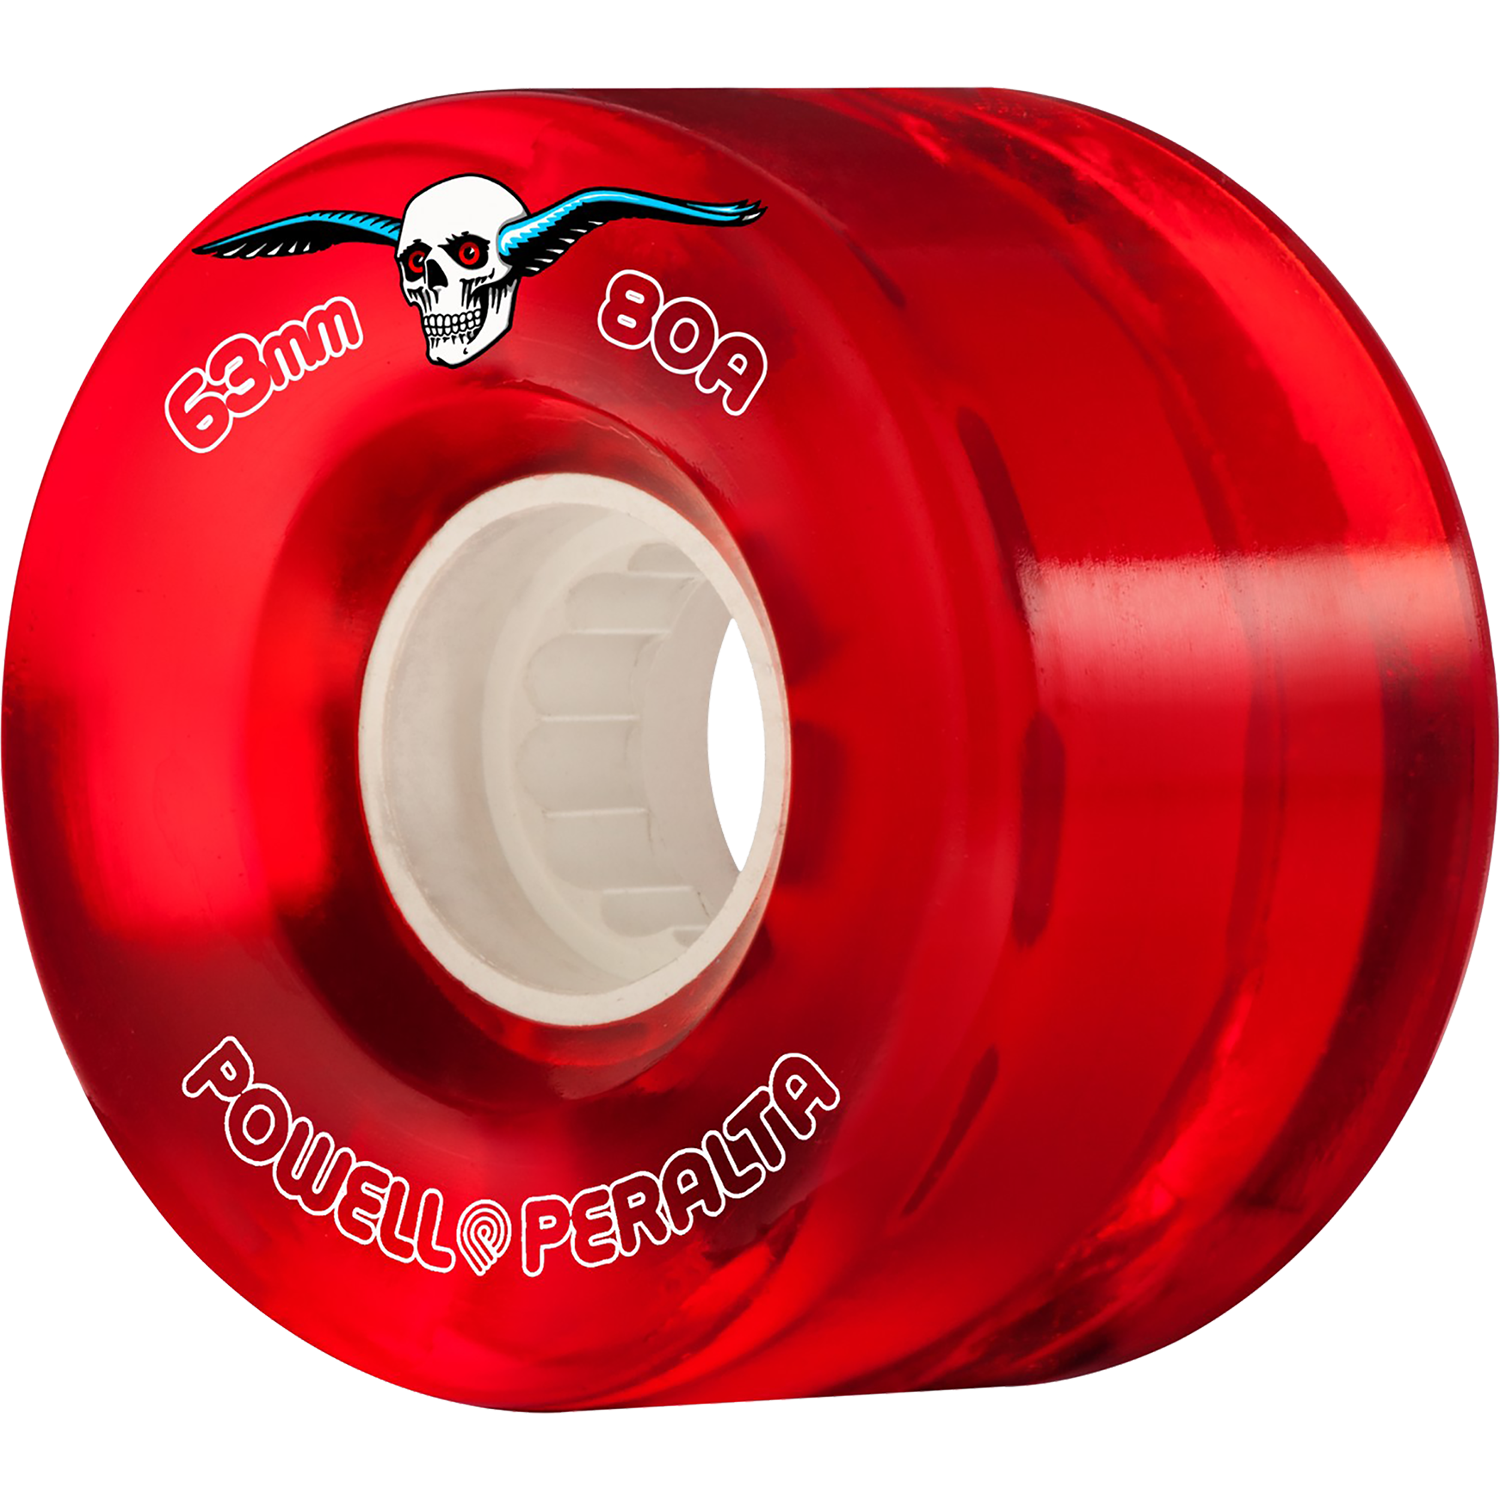 Powell Peralta Clear Cruiser 63mm 80a Red Longboard Wheels (Set of 4)